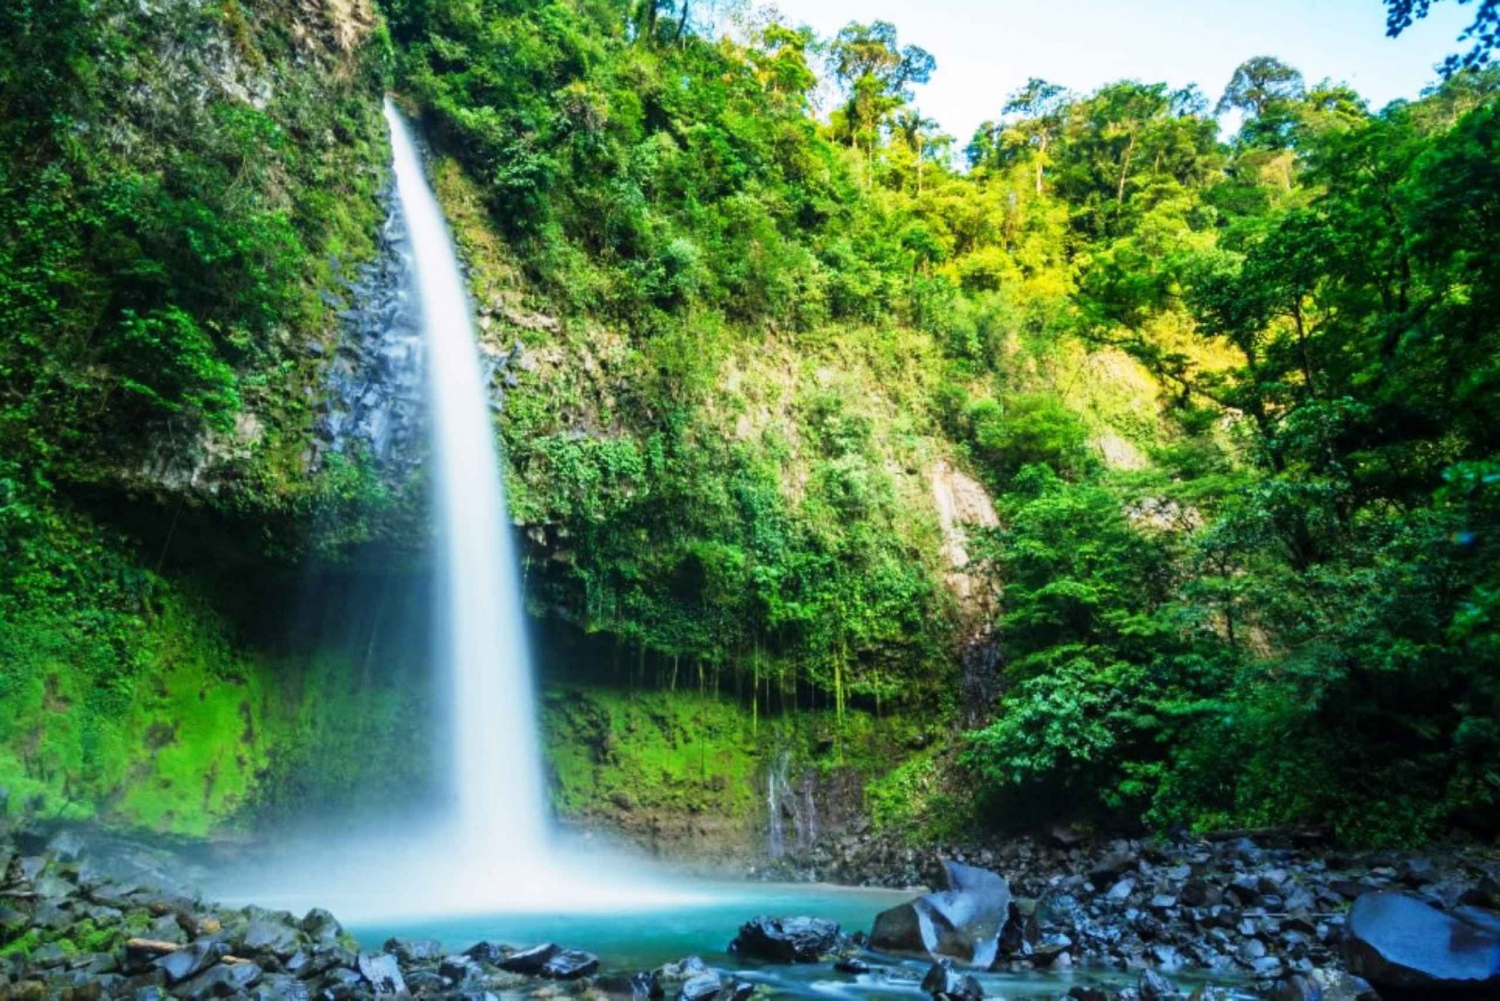 Jaco Arenal Volcano, Fortuna Waterfall, & Hot Springs Tour in Costa Rica